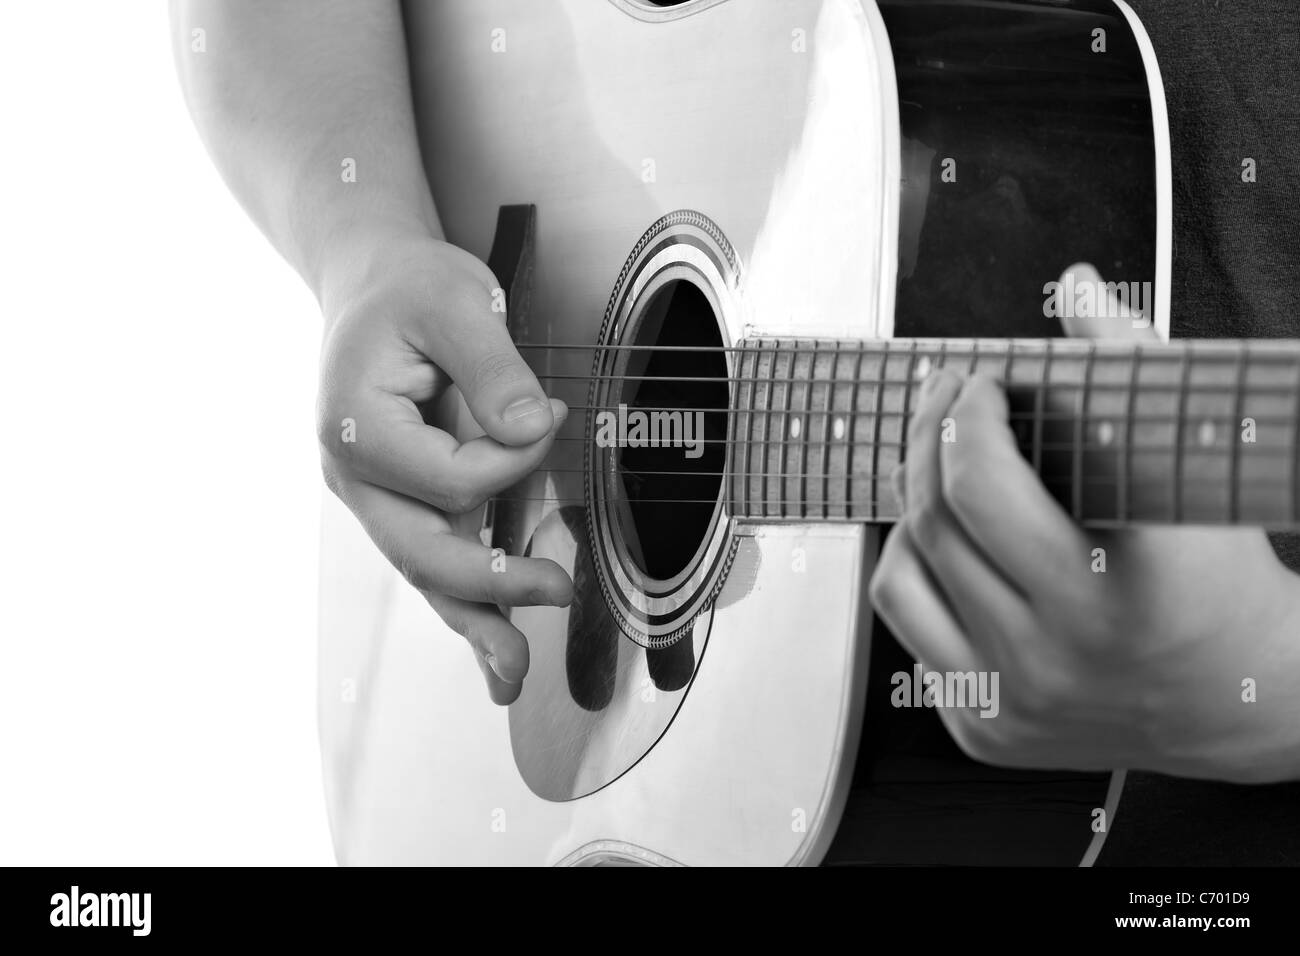 Closeup of a mans hands strumming and electric acoustic guitar isolated over a white background. Stock Photo